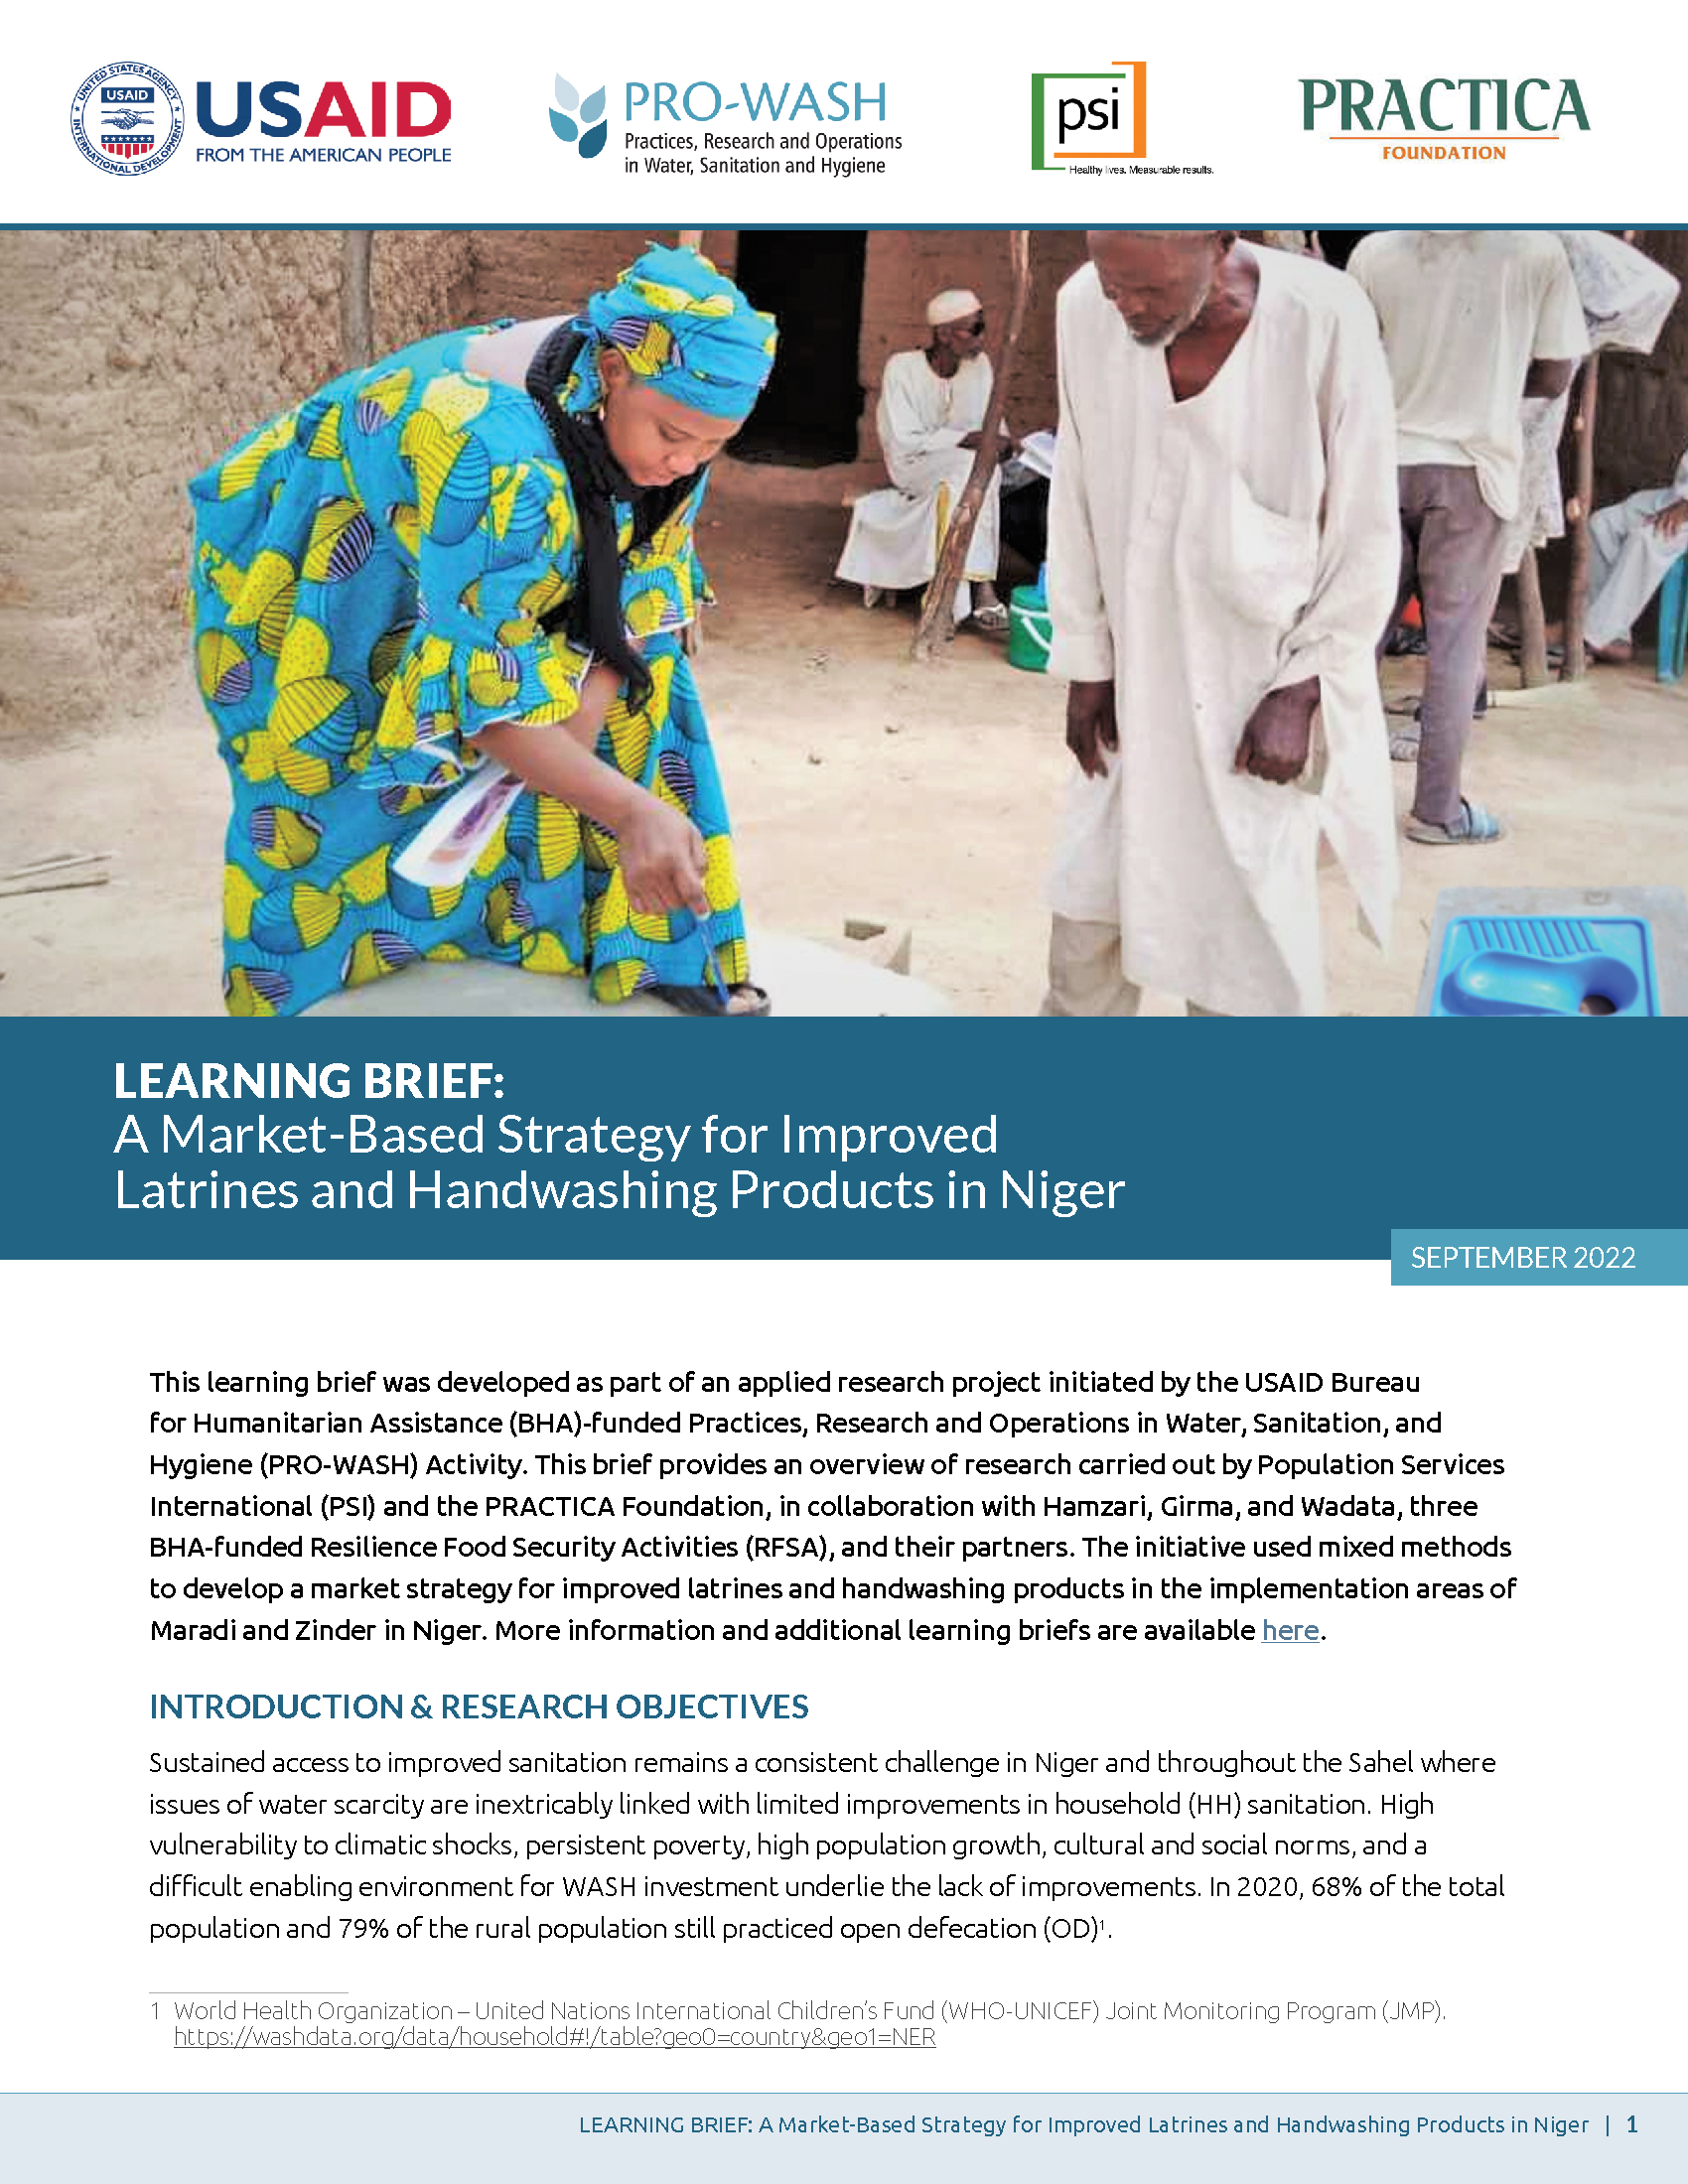 Cover page for A Market-Based Strategy for Improved Latrines and Handwashing Products in Niger